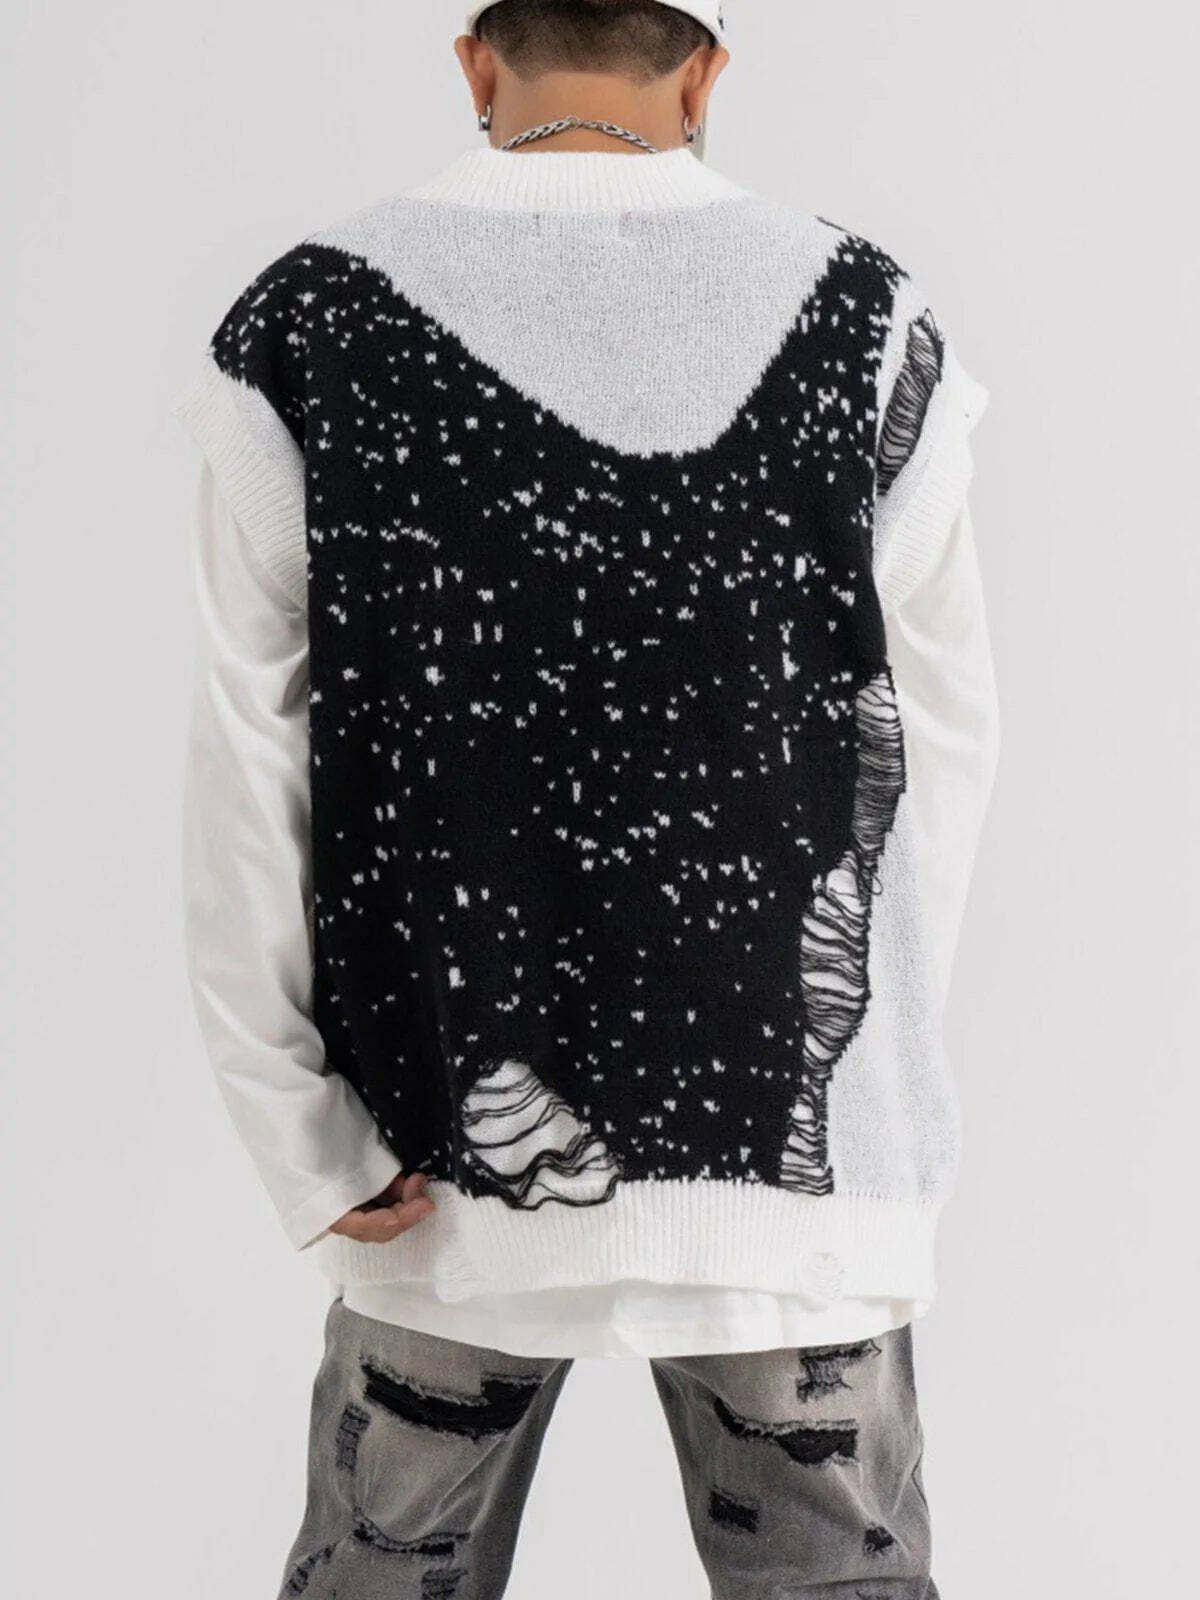 revolutionary colorful knit vest edgy  retro  and vibrant streetwear 2656